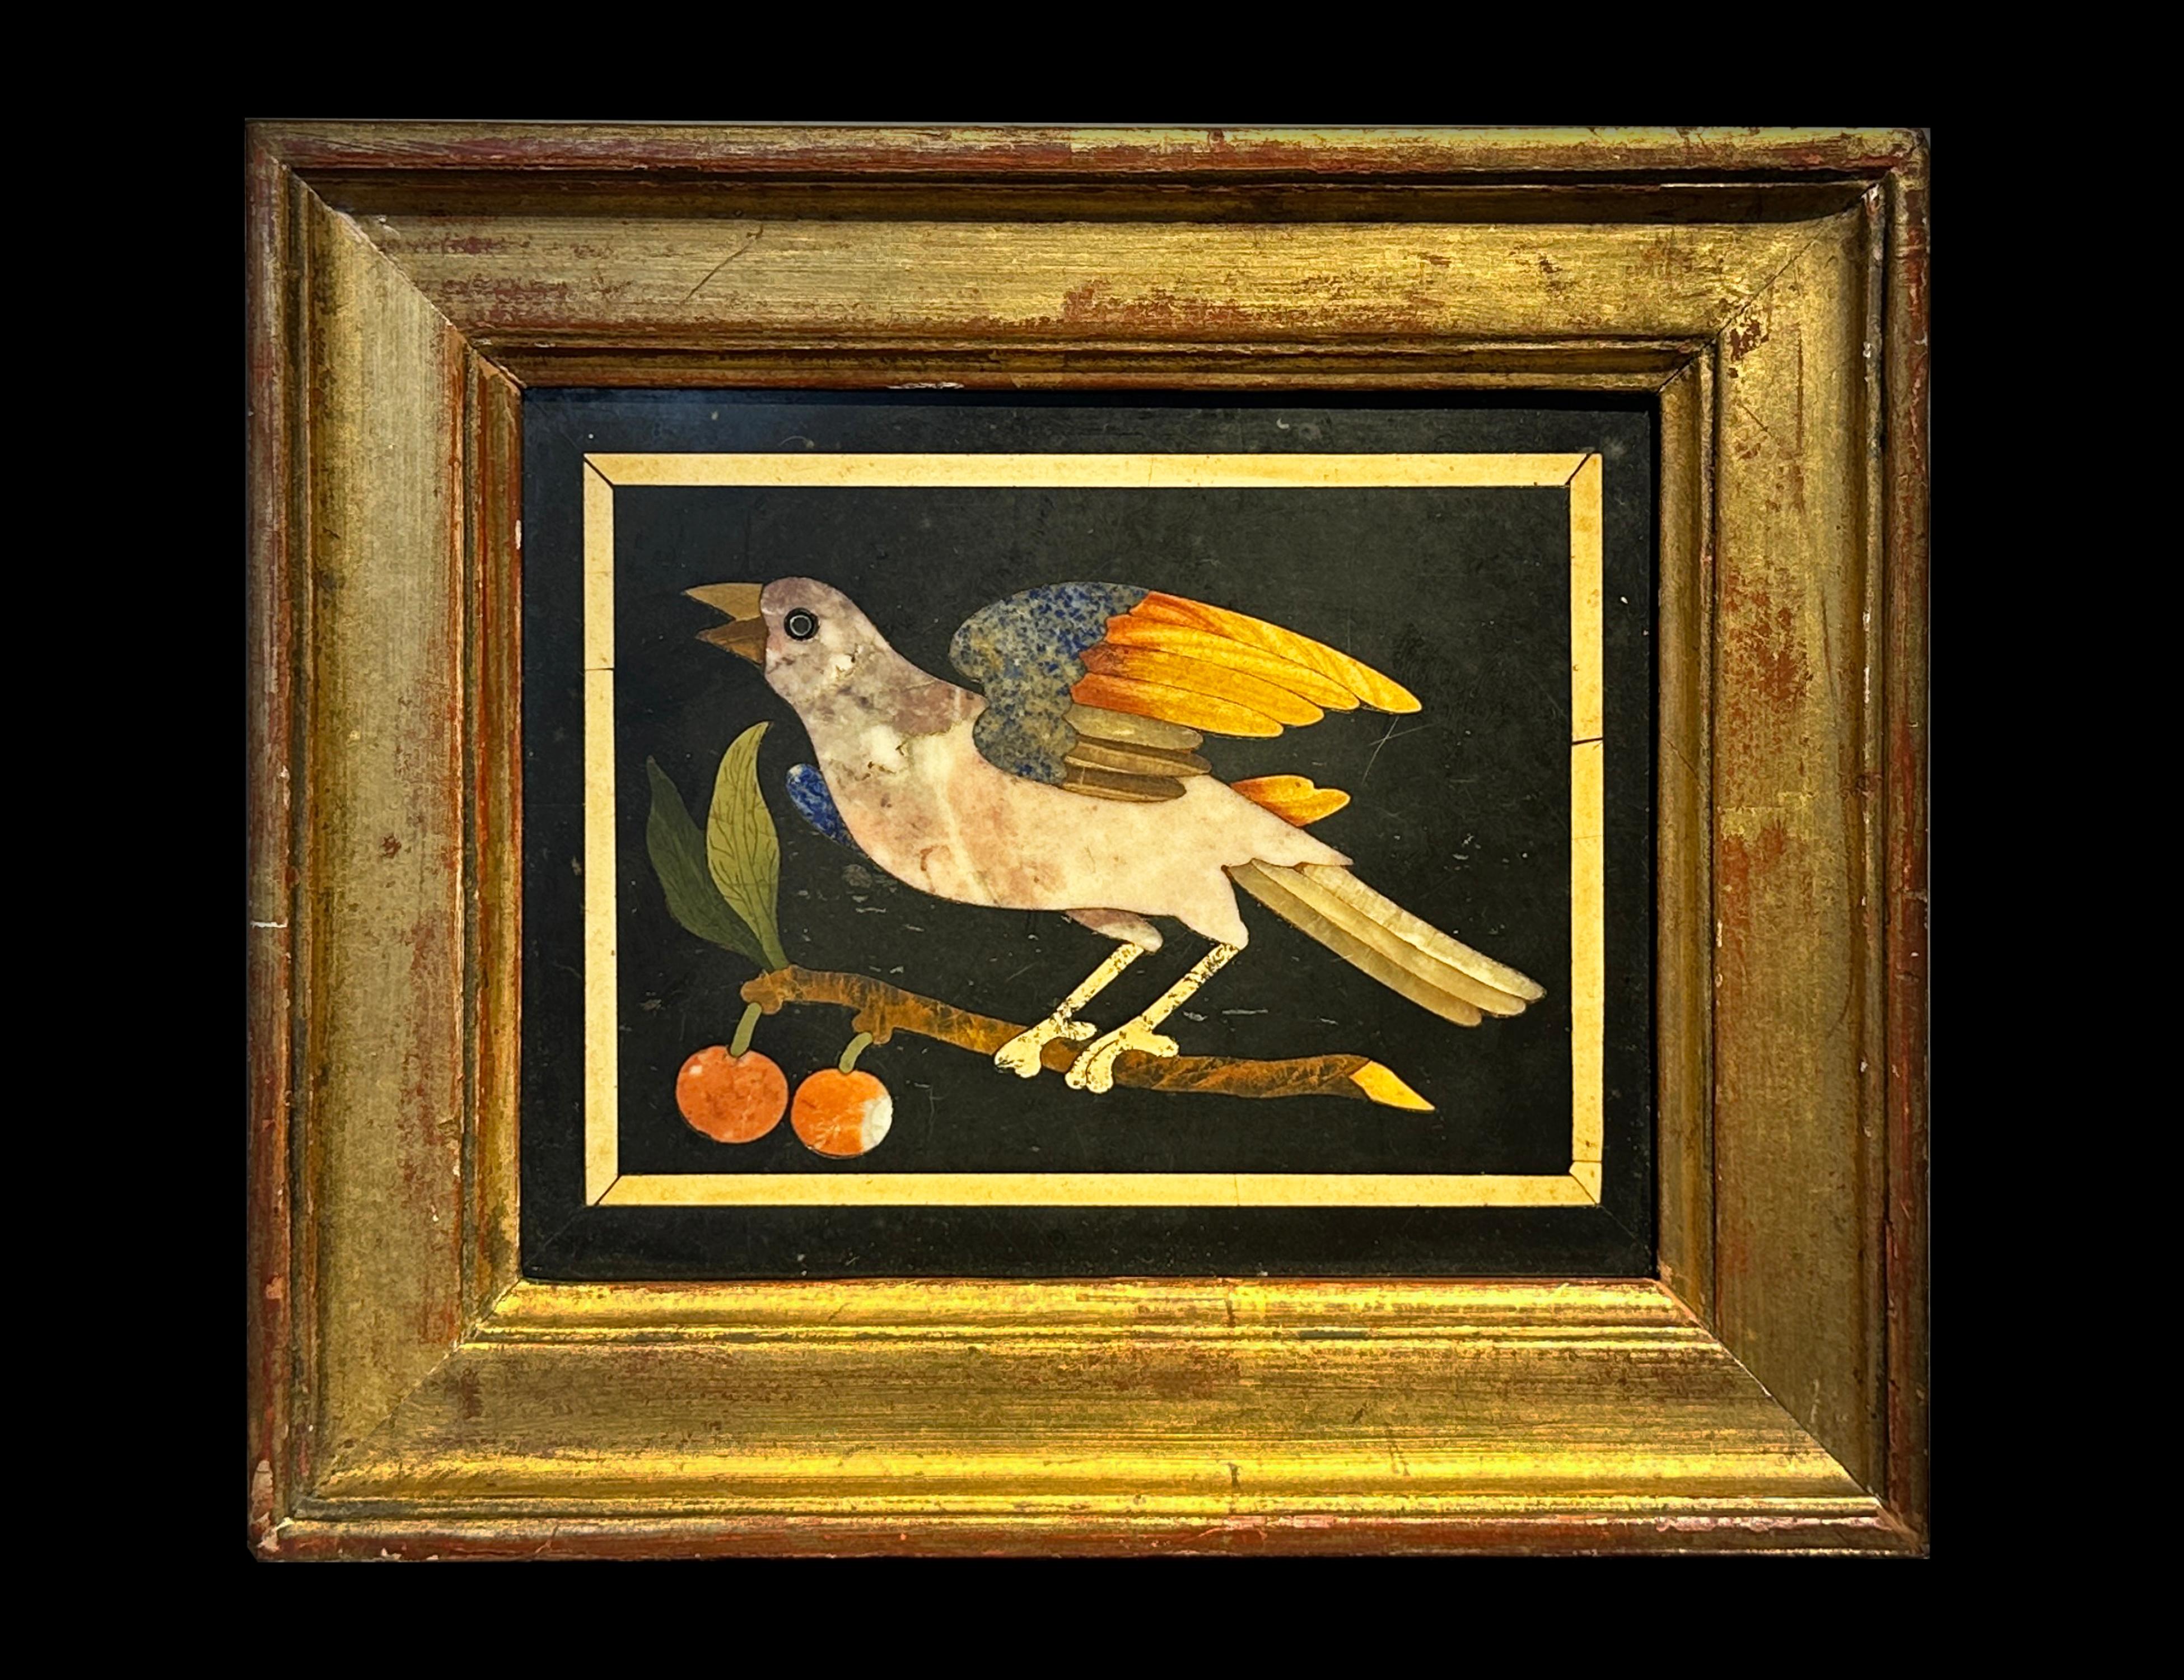 PAIR OF PIETRA DURA PLAQUES WITH BIRDS
Florence, 18th Century
pietre dure in gilt wood frame

9.5 x 12 cm (3 3/4 x 4 3/4 in) without frame
15 x 17.2 cm (6 x 6 3/4 in) with frame